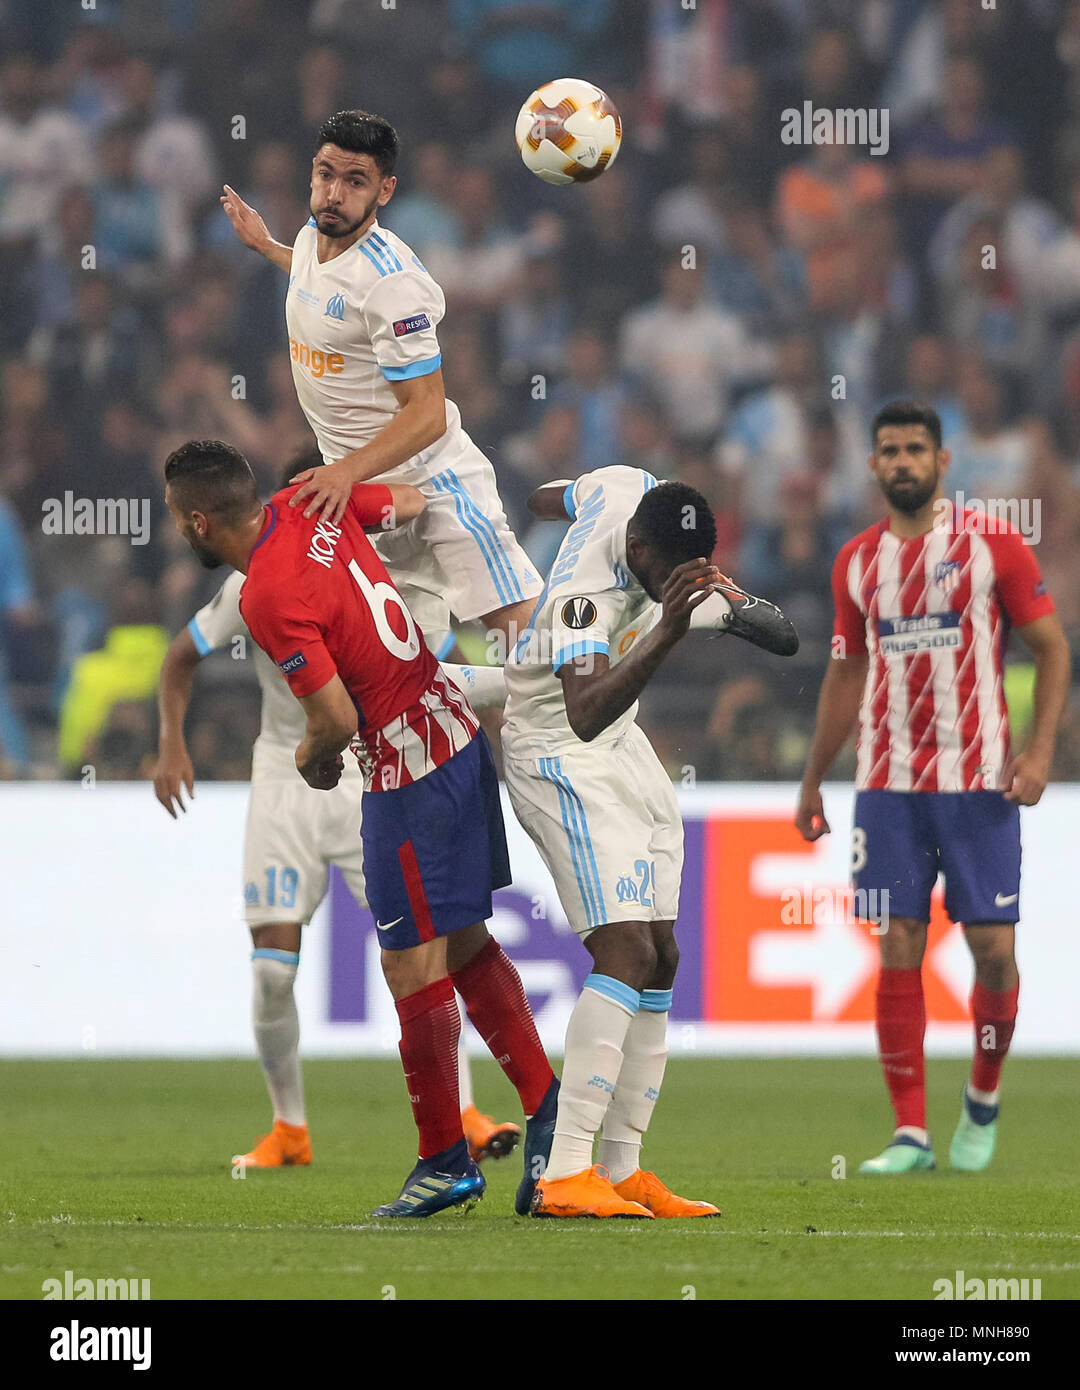 Morgan Sanson of Marseille, Koke of Atletico Madrid and Andre-Frank Zambo Anguissa of Marseille during the UEFA Europa League Final match between Marseille and Atletico Madrid at Parc Olympique Lyonnais on May 16th 2018 in Lyon, France. (Photo by Daniel Chesterton/phcimages.com) Stock Photo